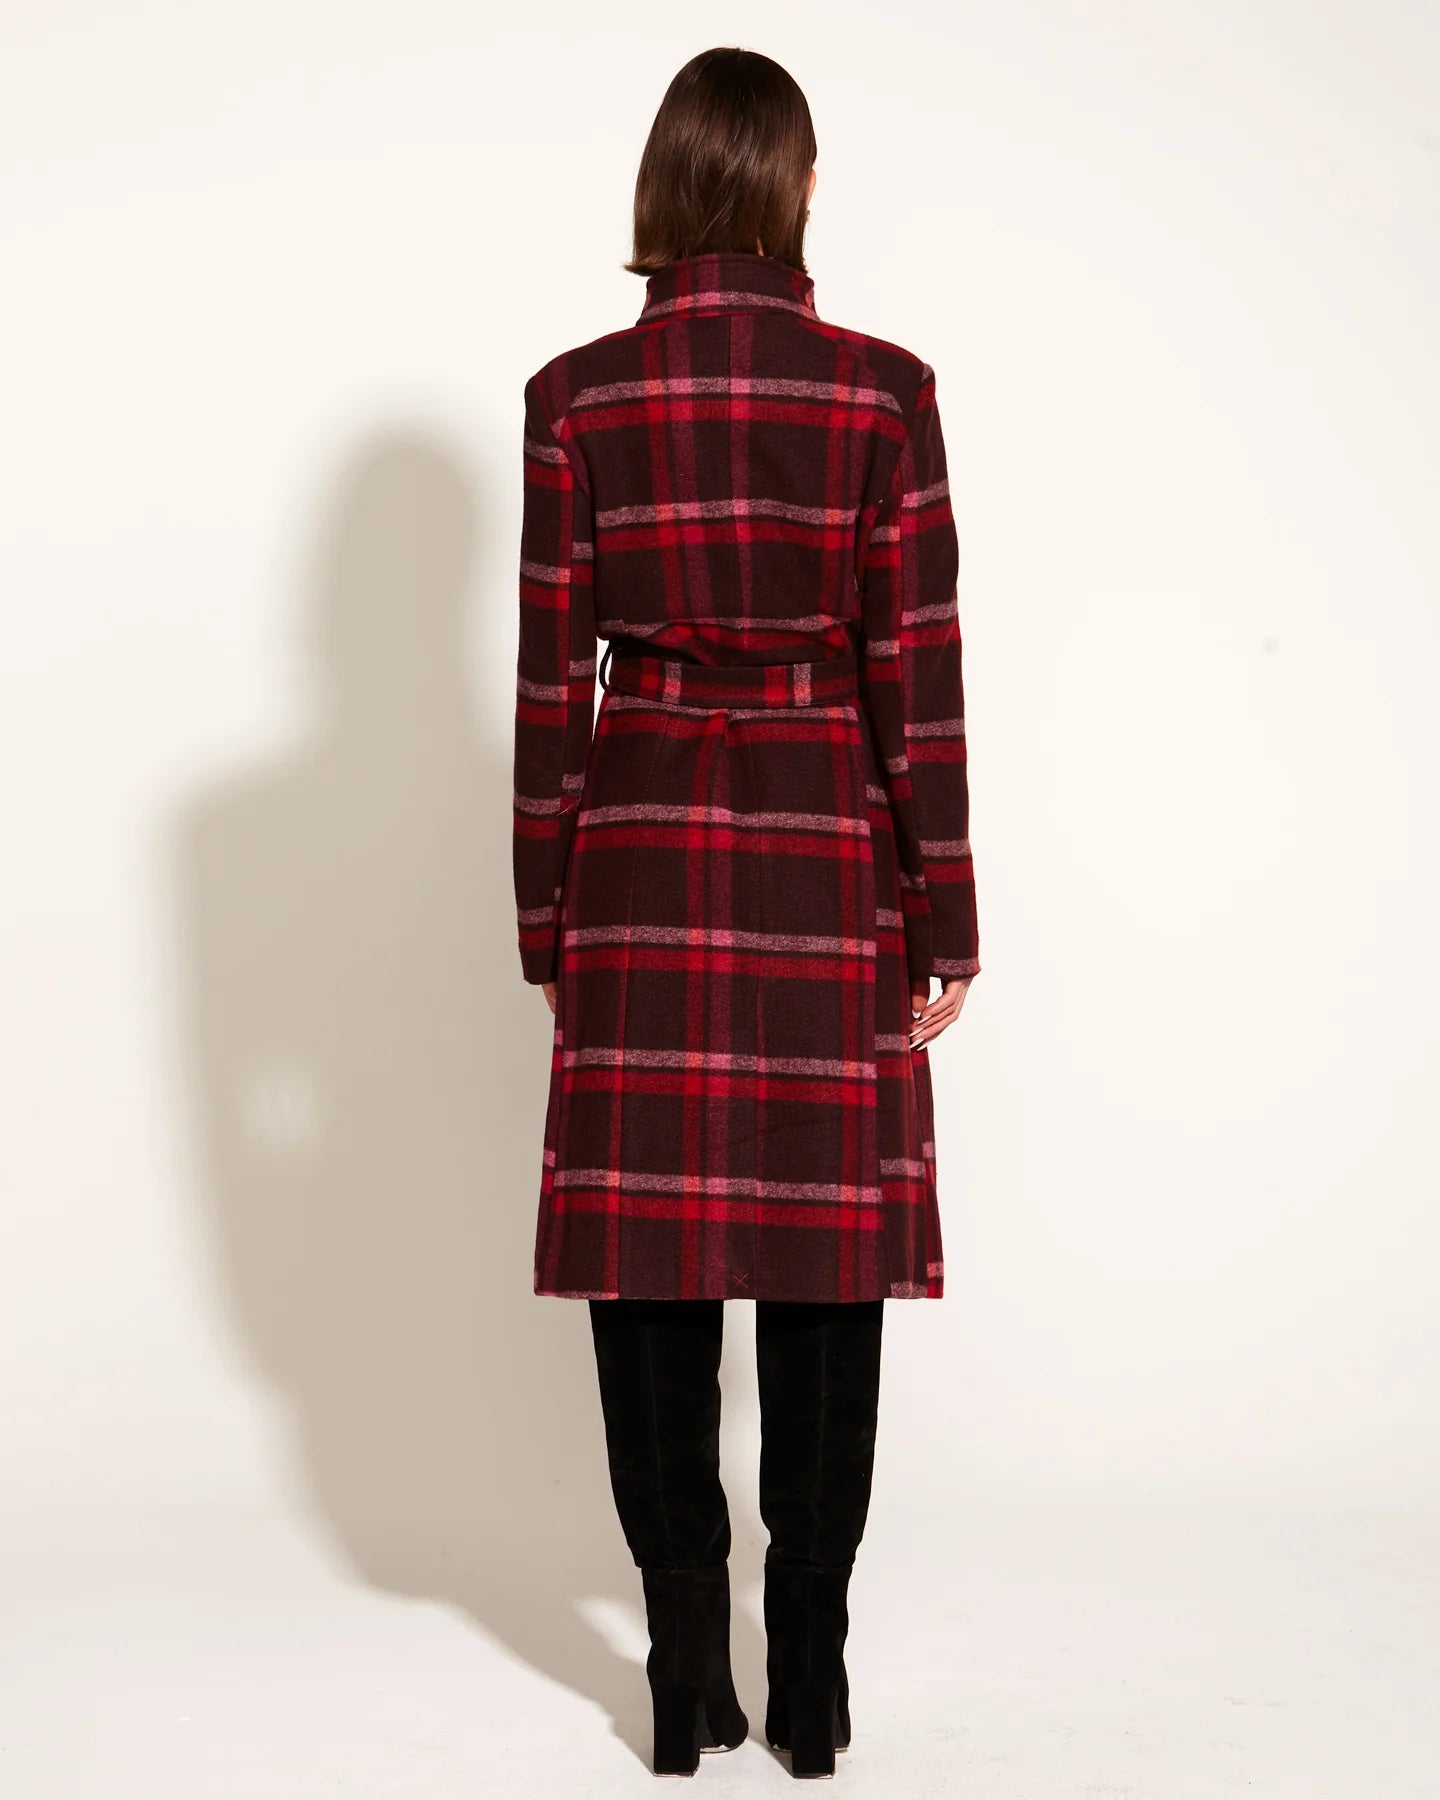 FATE+BECKER CHOOSE YOU COAT PINK RED CHECK